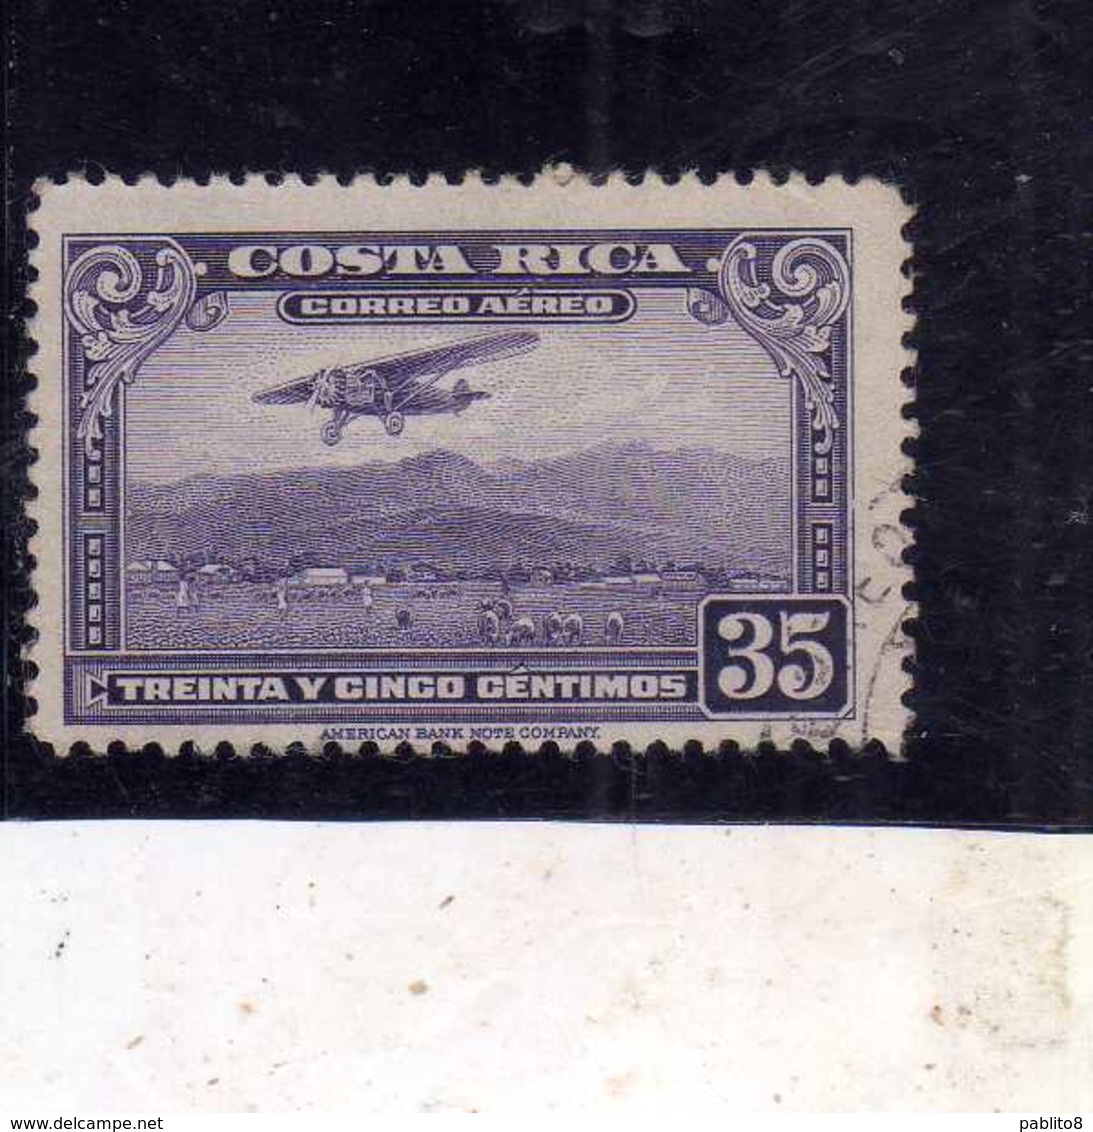 COSTA RICA 1952 1953 AIR MAIL POSTA AEREA AEREO MAIL PLANE ABOUT TO LAND CENT 35c USATO USED OBLITERE' - Costa Rica